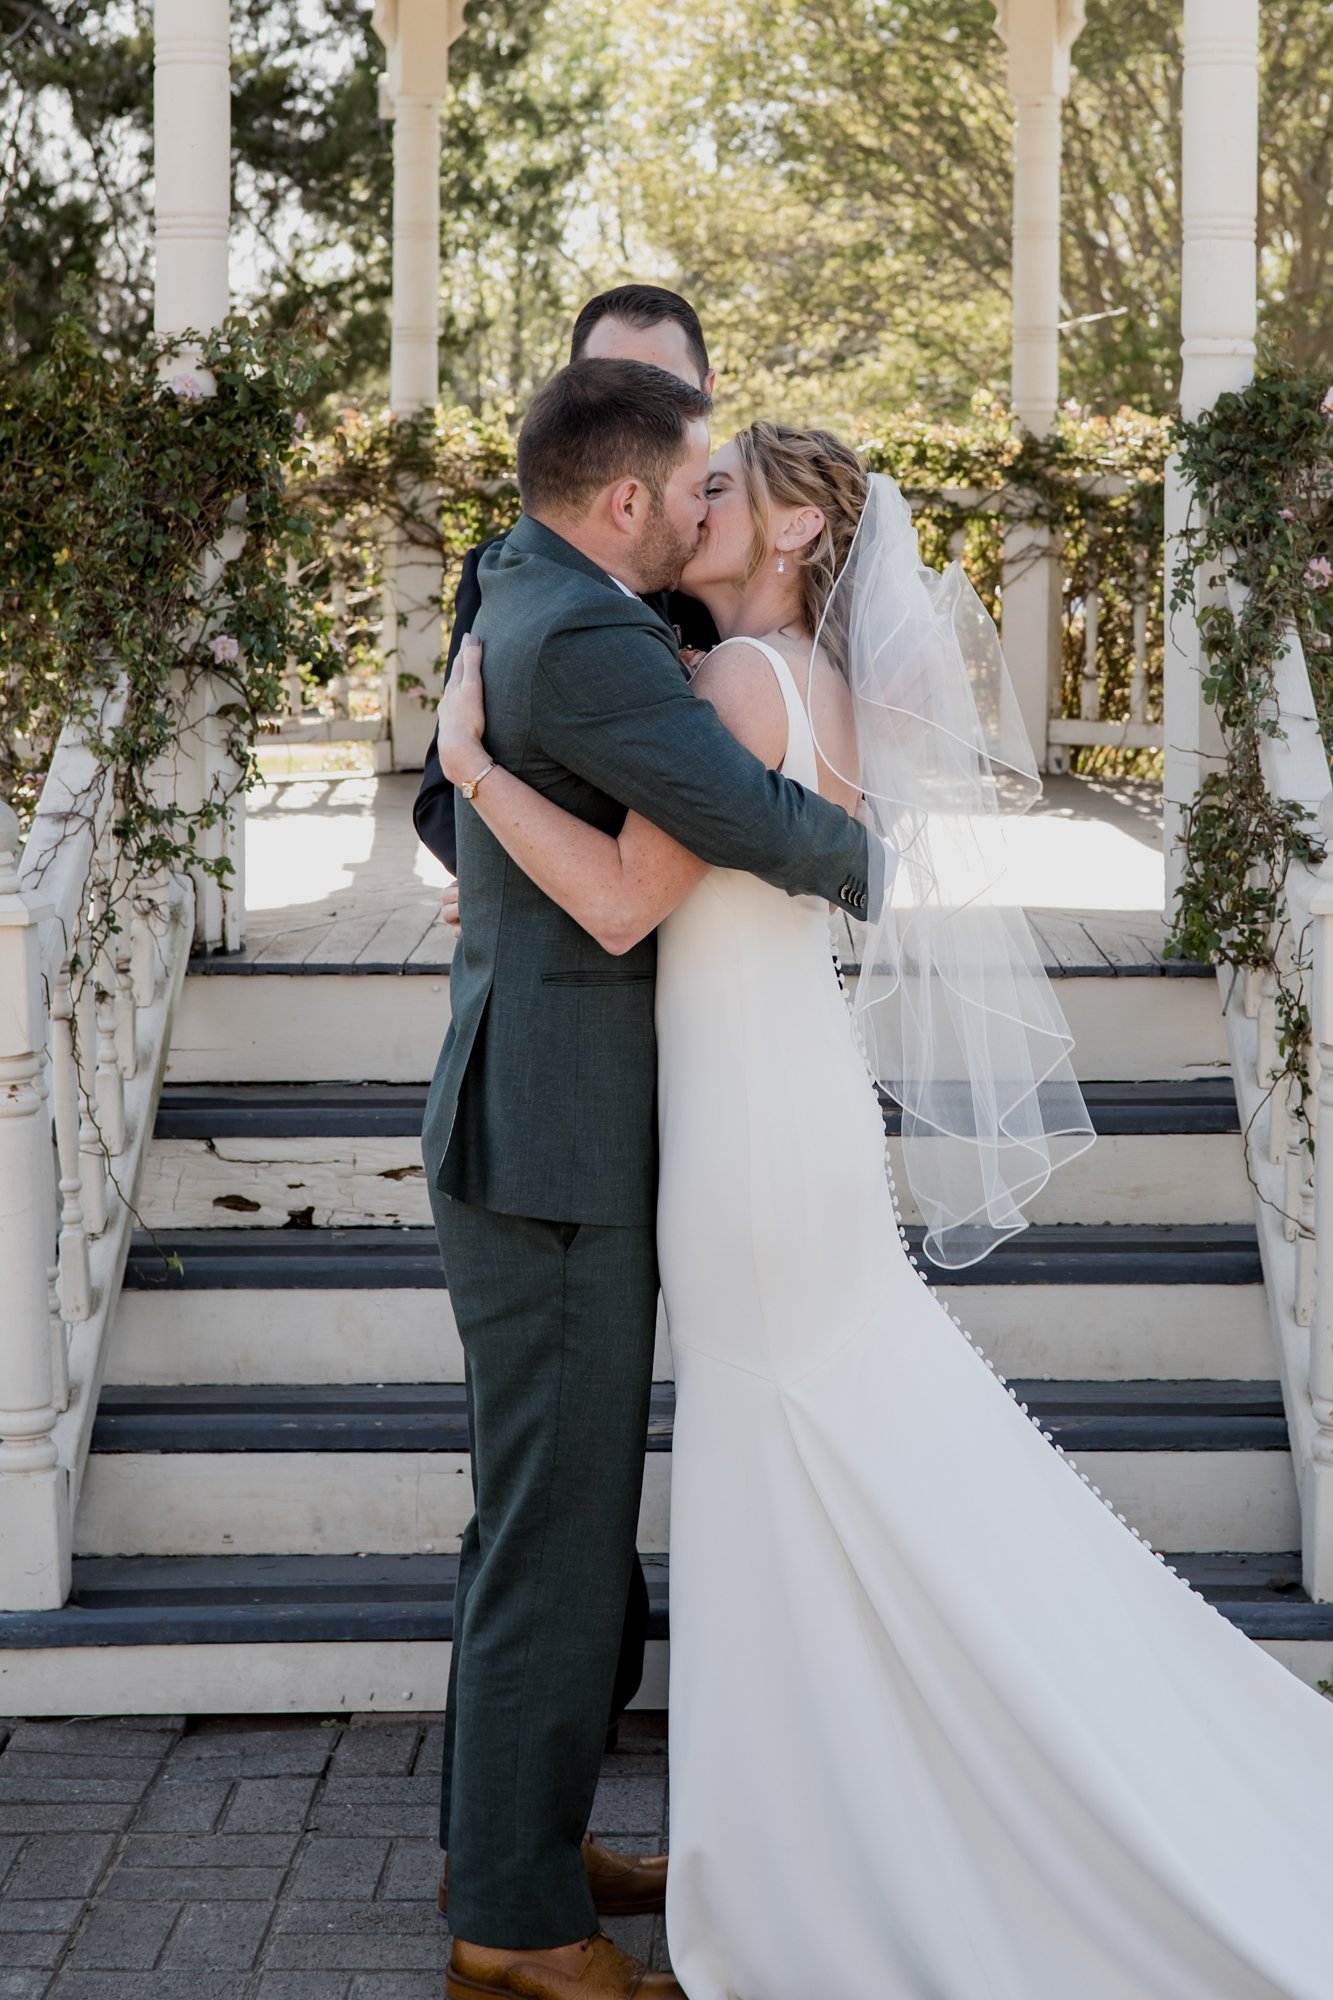 Bride and groom share first kiss - Wedding at Antique Rose Emporium